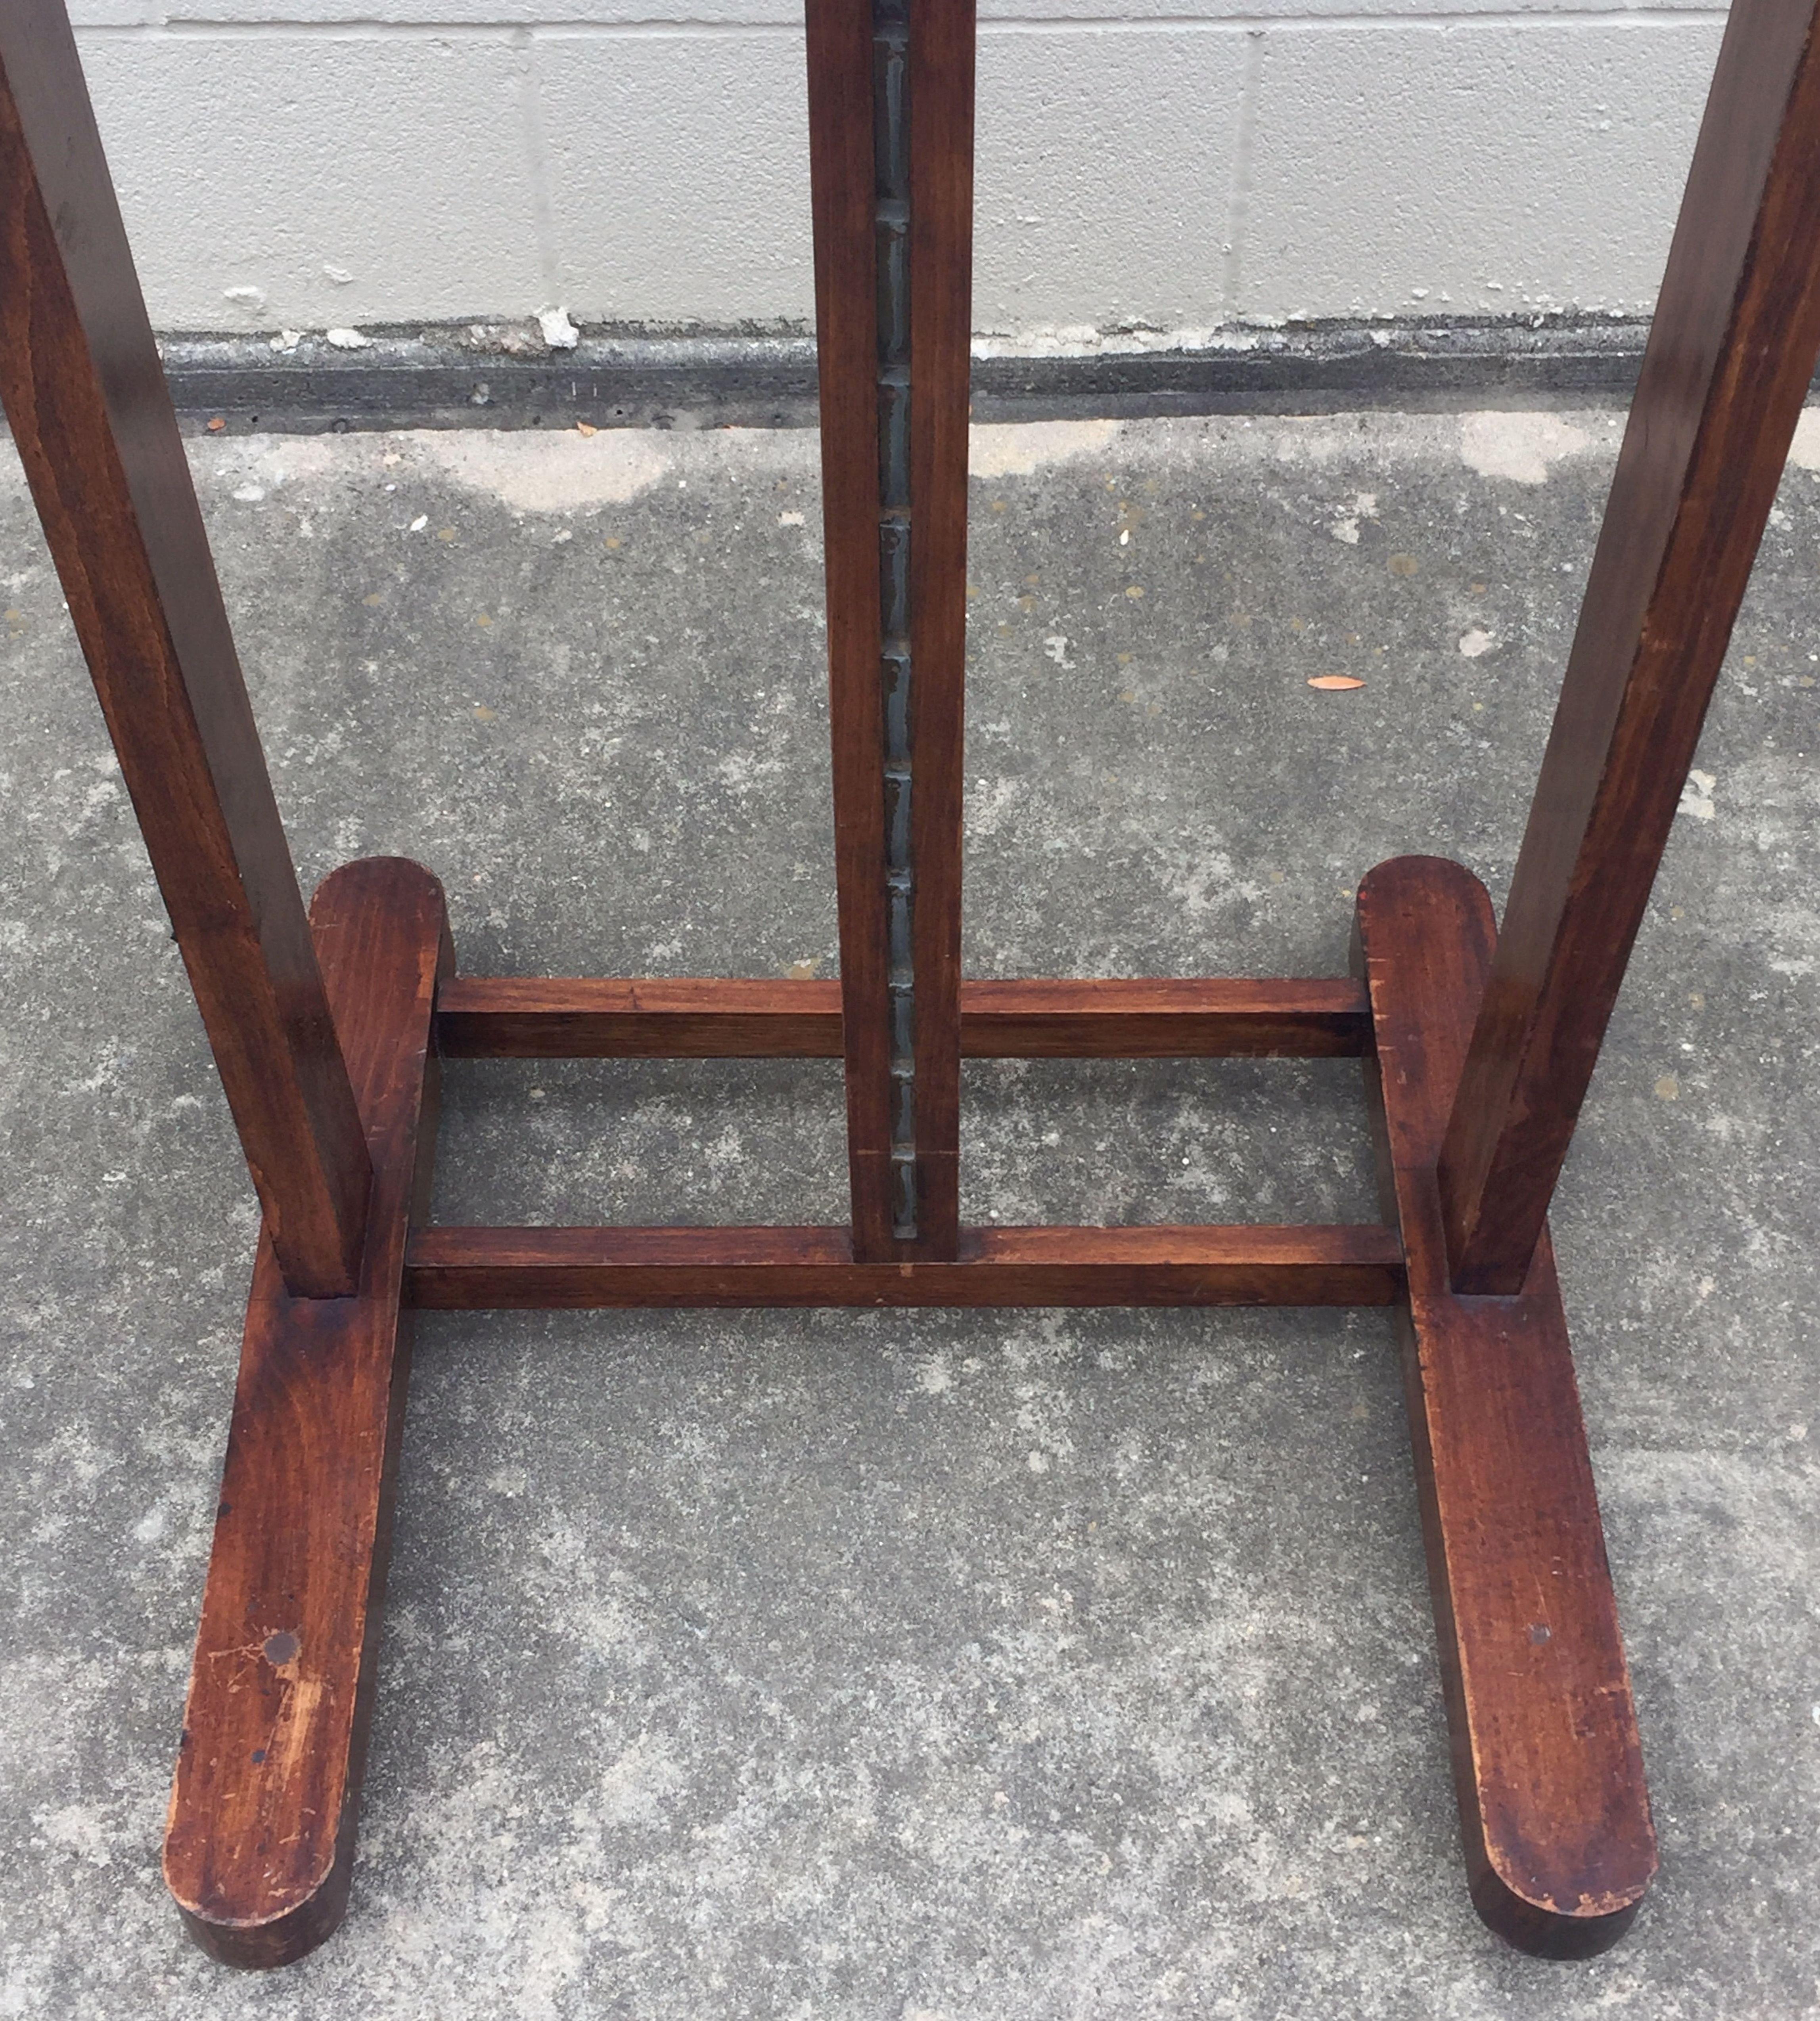 Large English Artist's Display or Floor Easel with Adjustable Tray 15